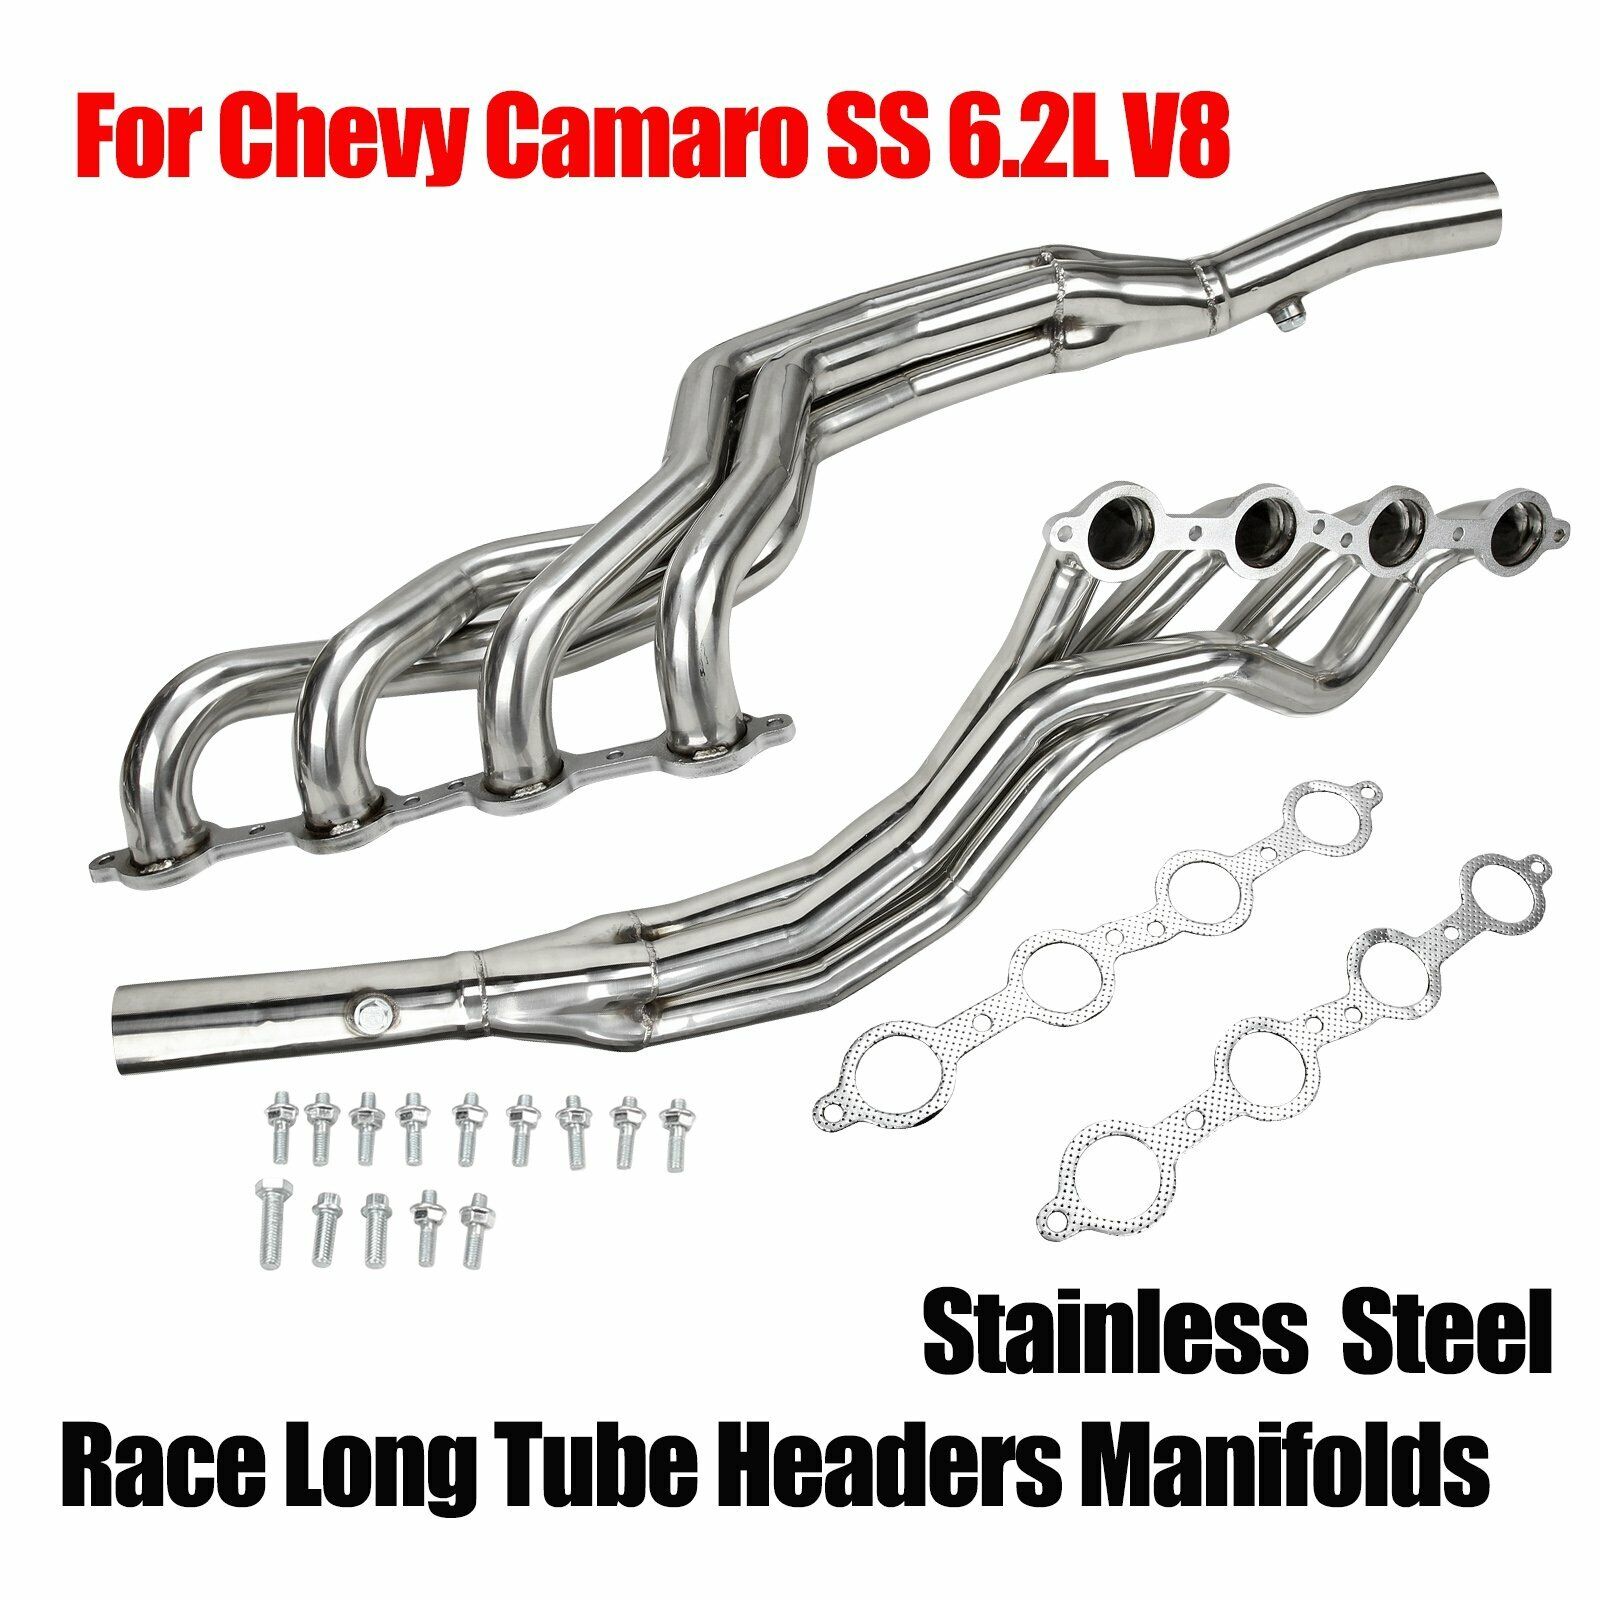 For Chevy Camaro SS 6.2L V8 Stainless Long Tube Headers Manifolds 2010-2015